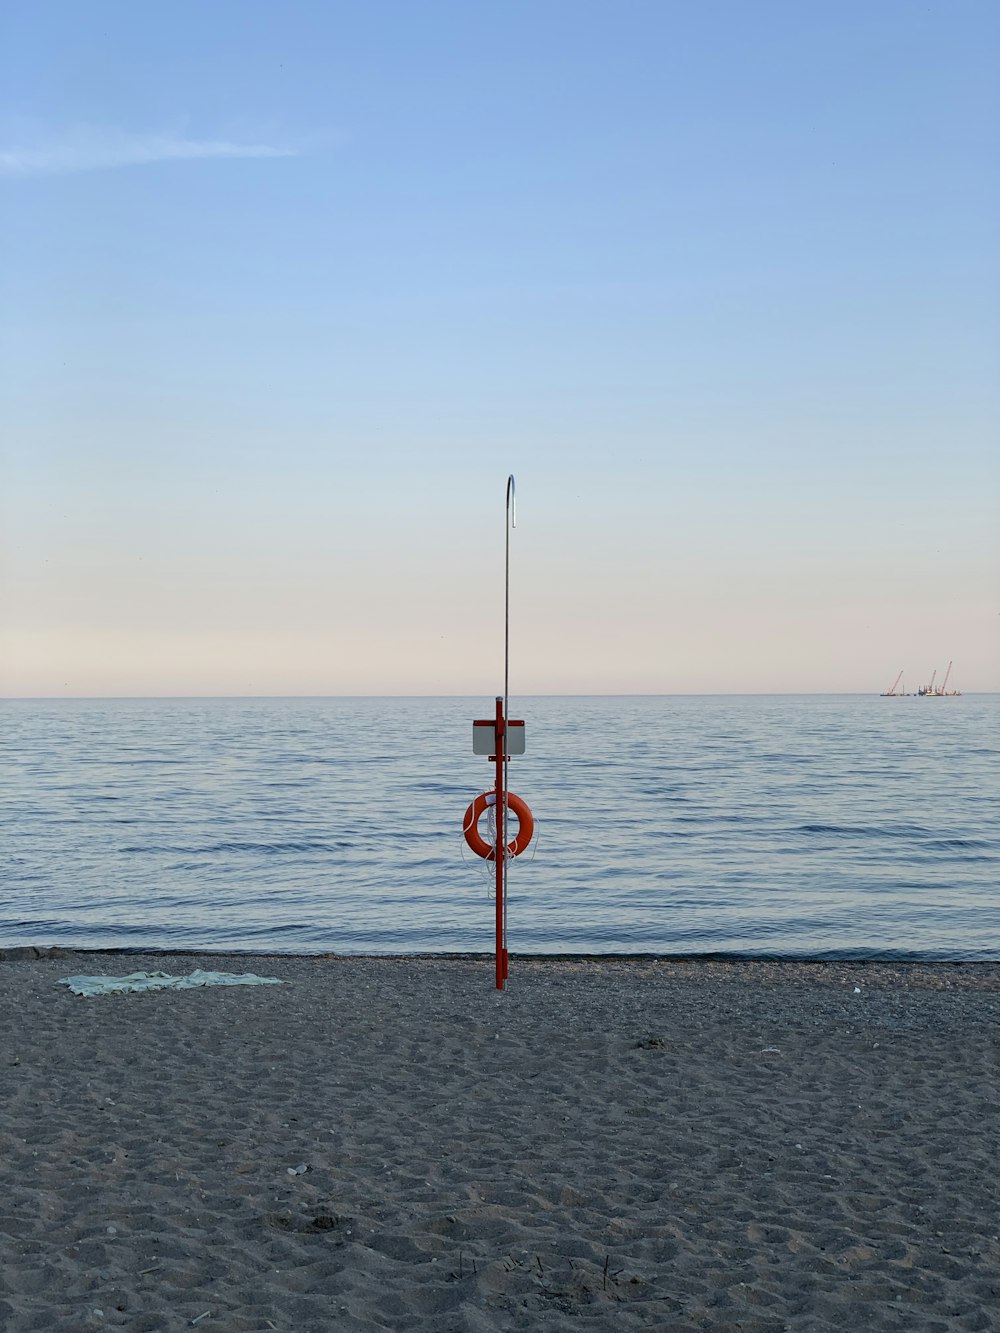 a pole on a beach with the ocean in the background